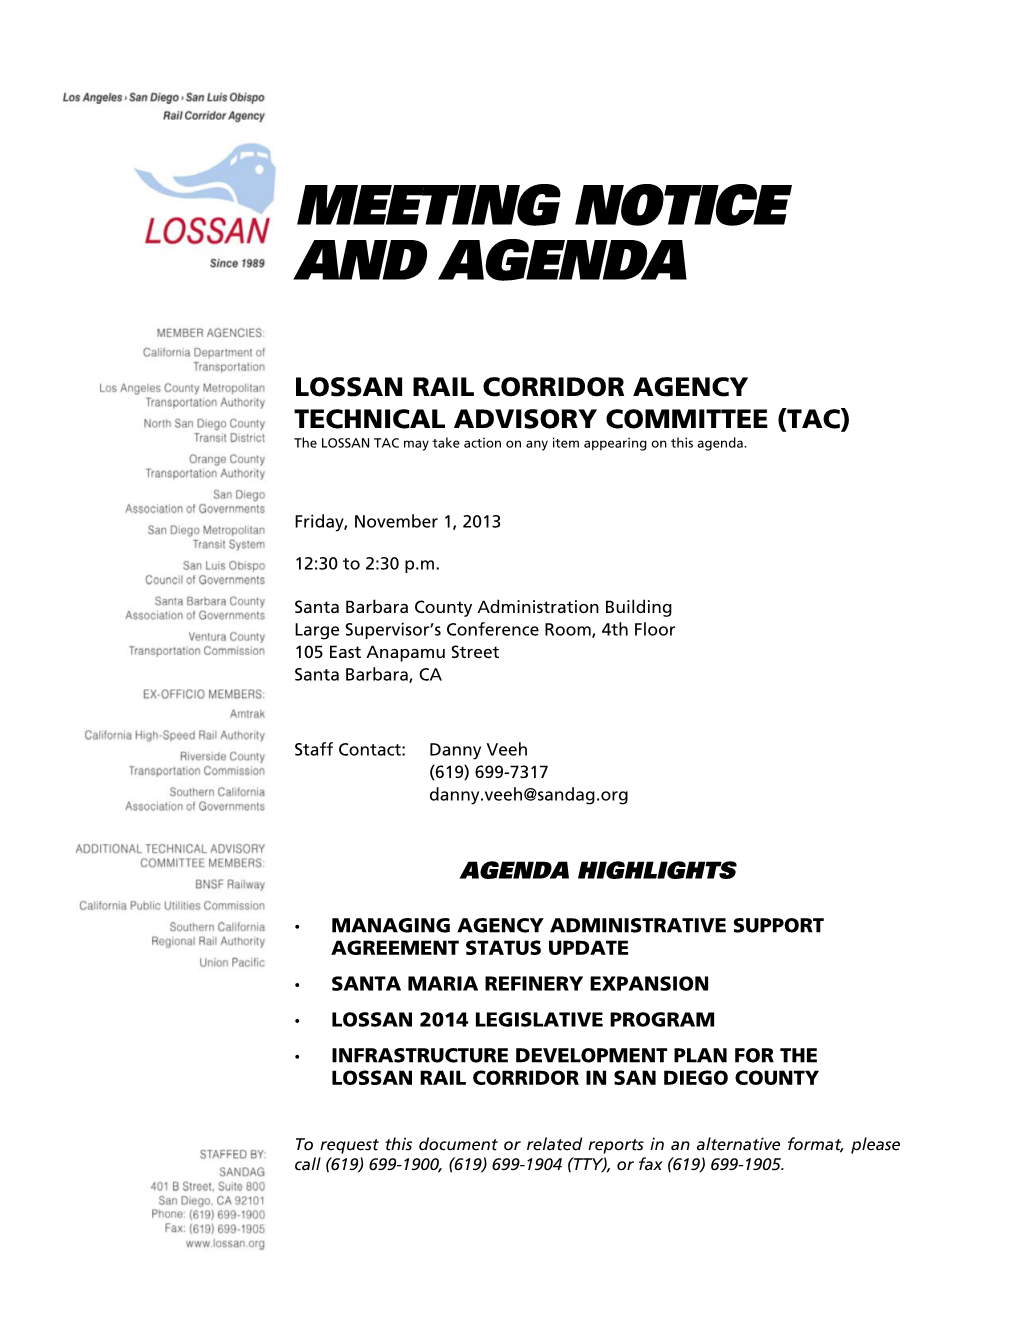 LOSSAN RAIL CORRIDOR AGENCY TECHNICAL ADVISORY COMMITTEE (TAC) the LOSSAN TAC May Take Action on Any Item Appearing on This Agenda